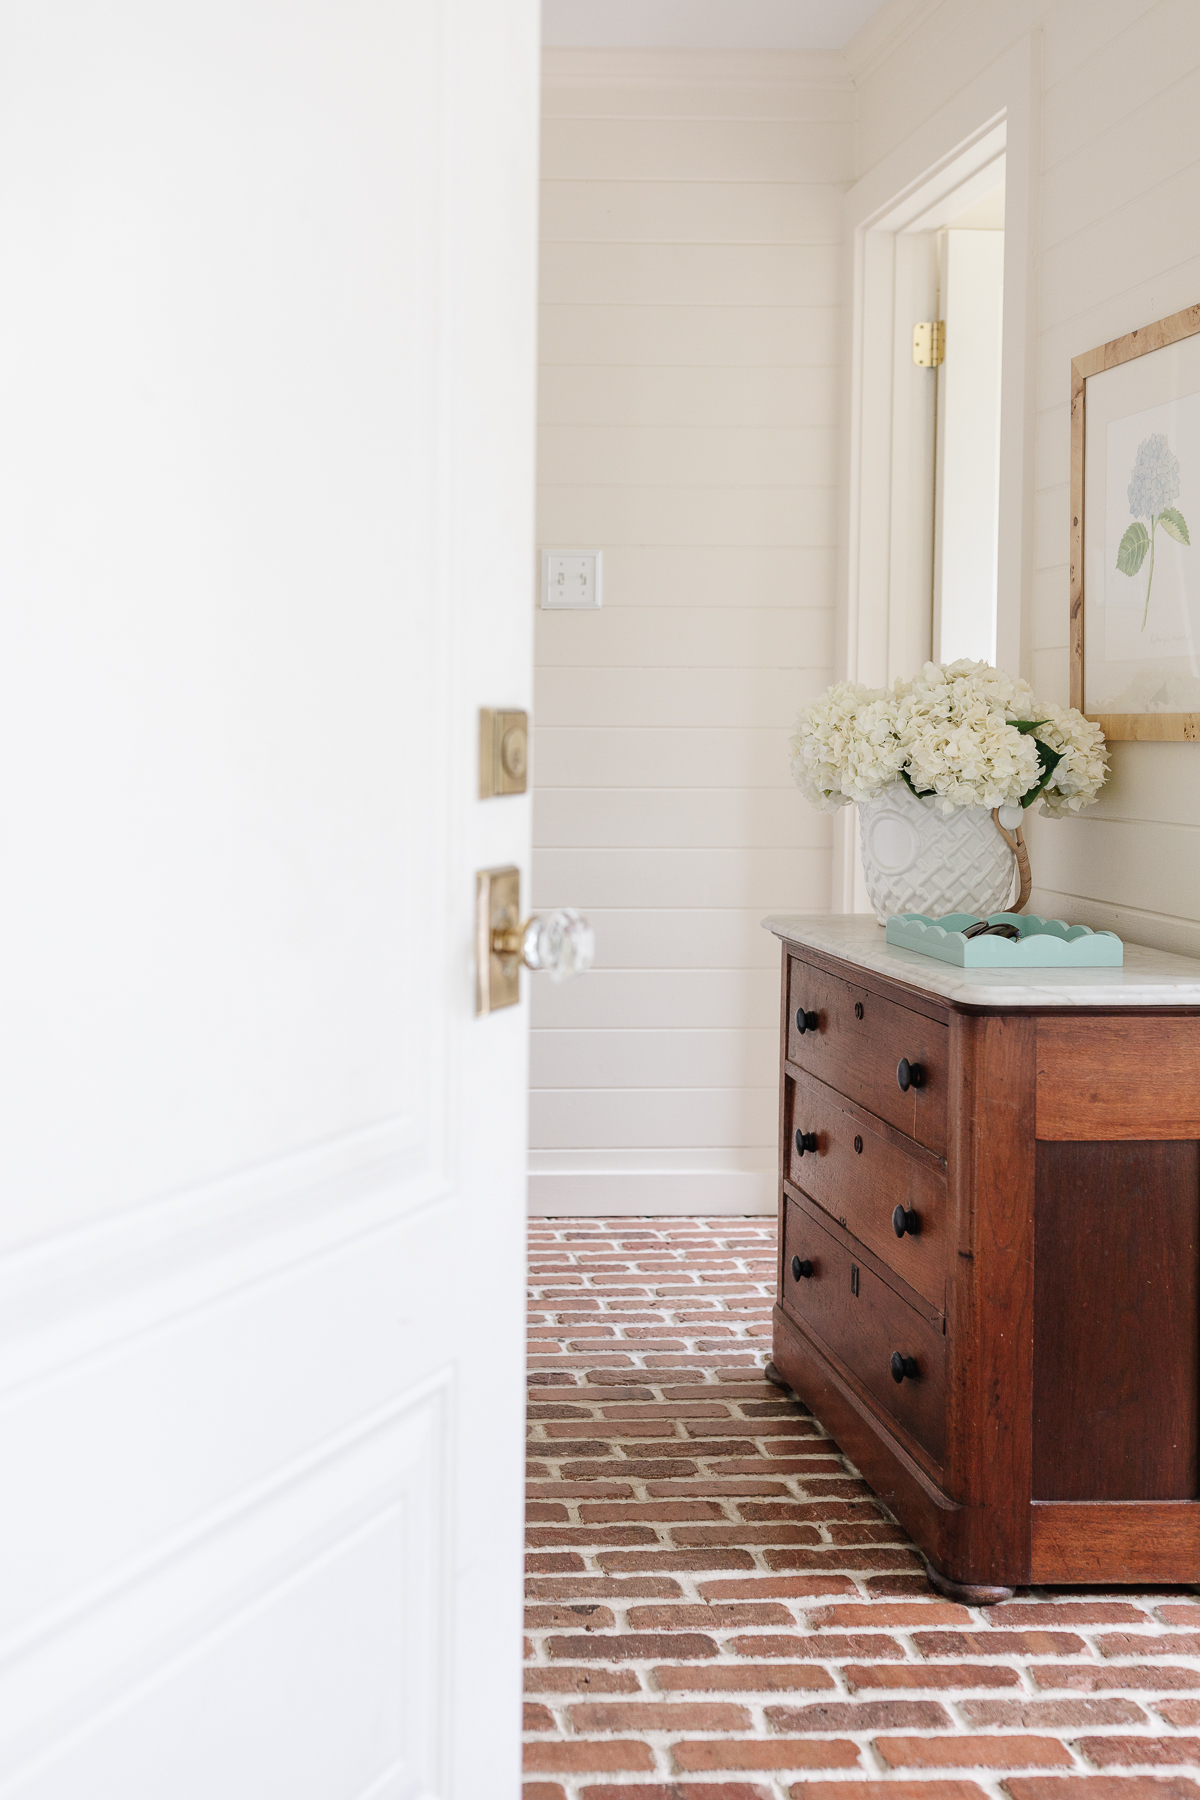 A mudroom with an antique chest and hydrangeas in a vase